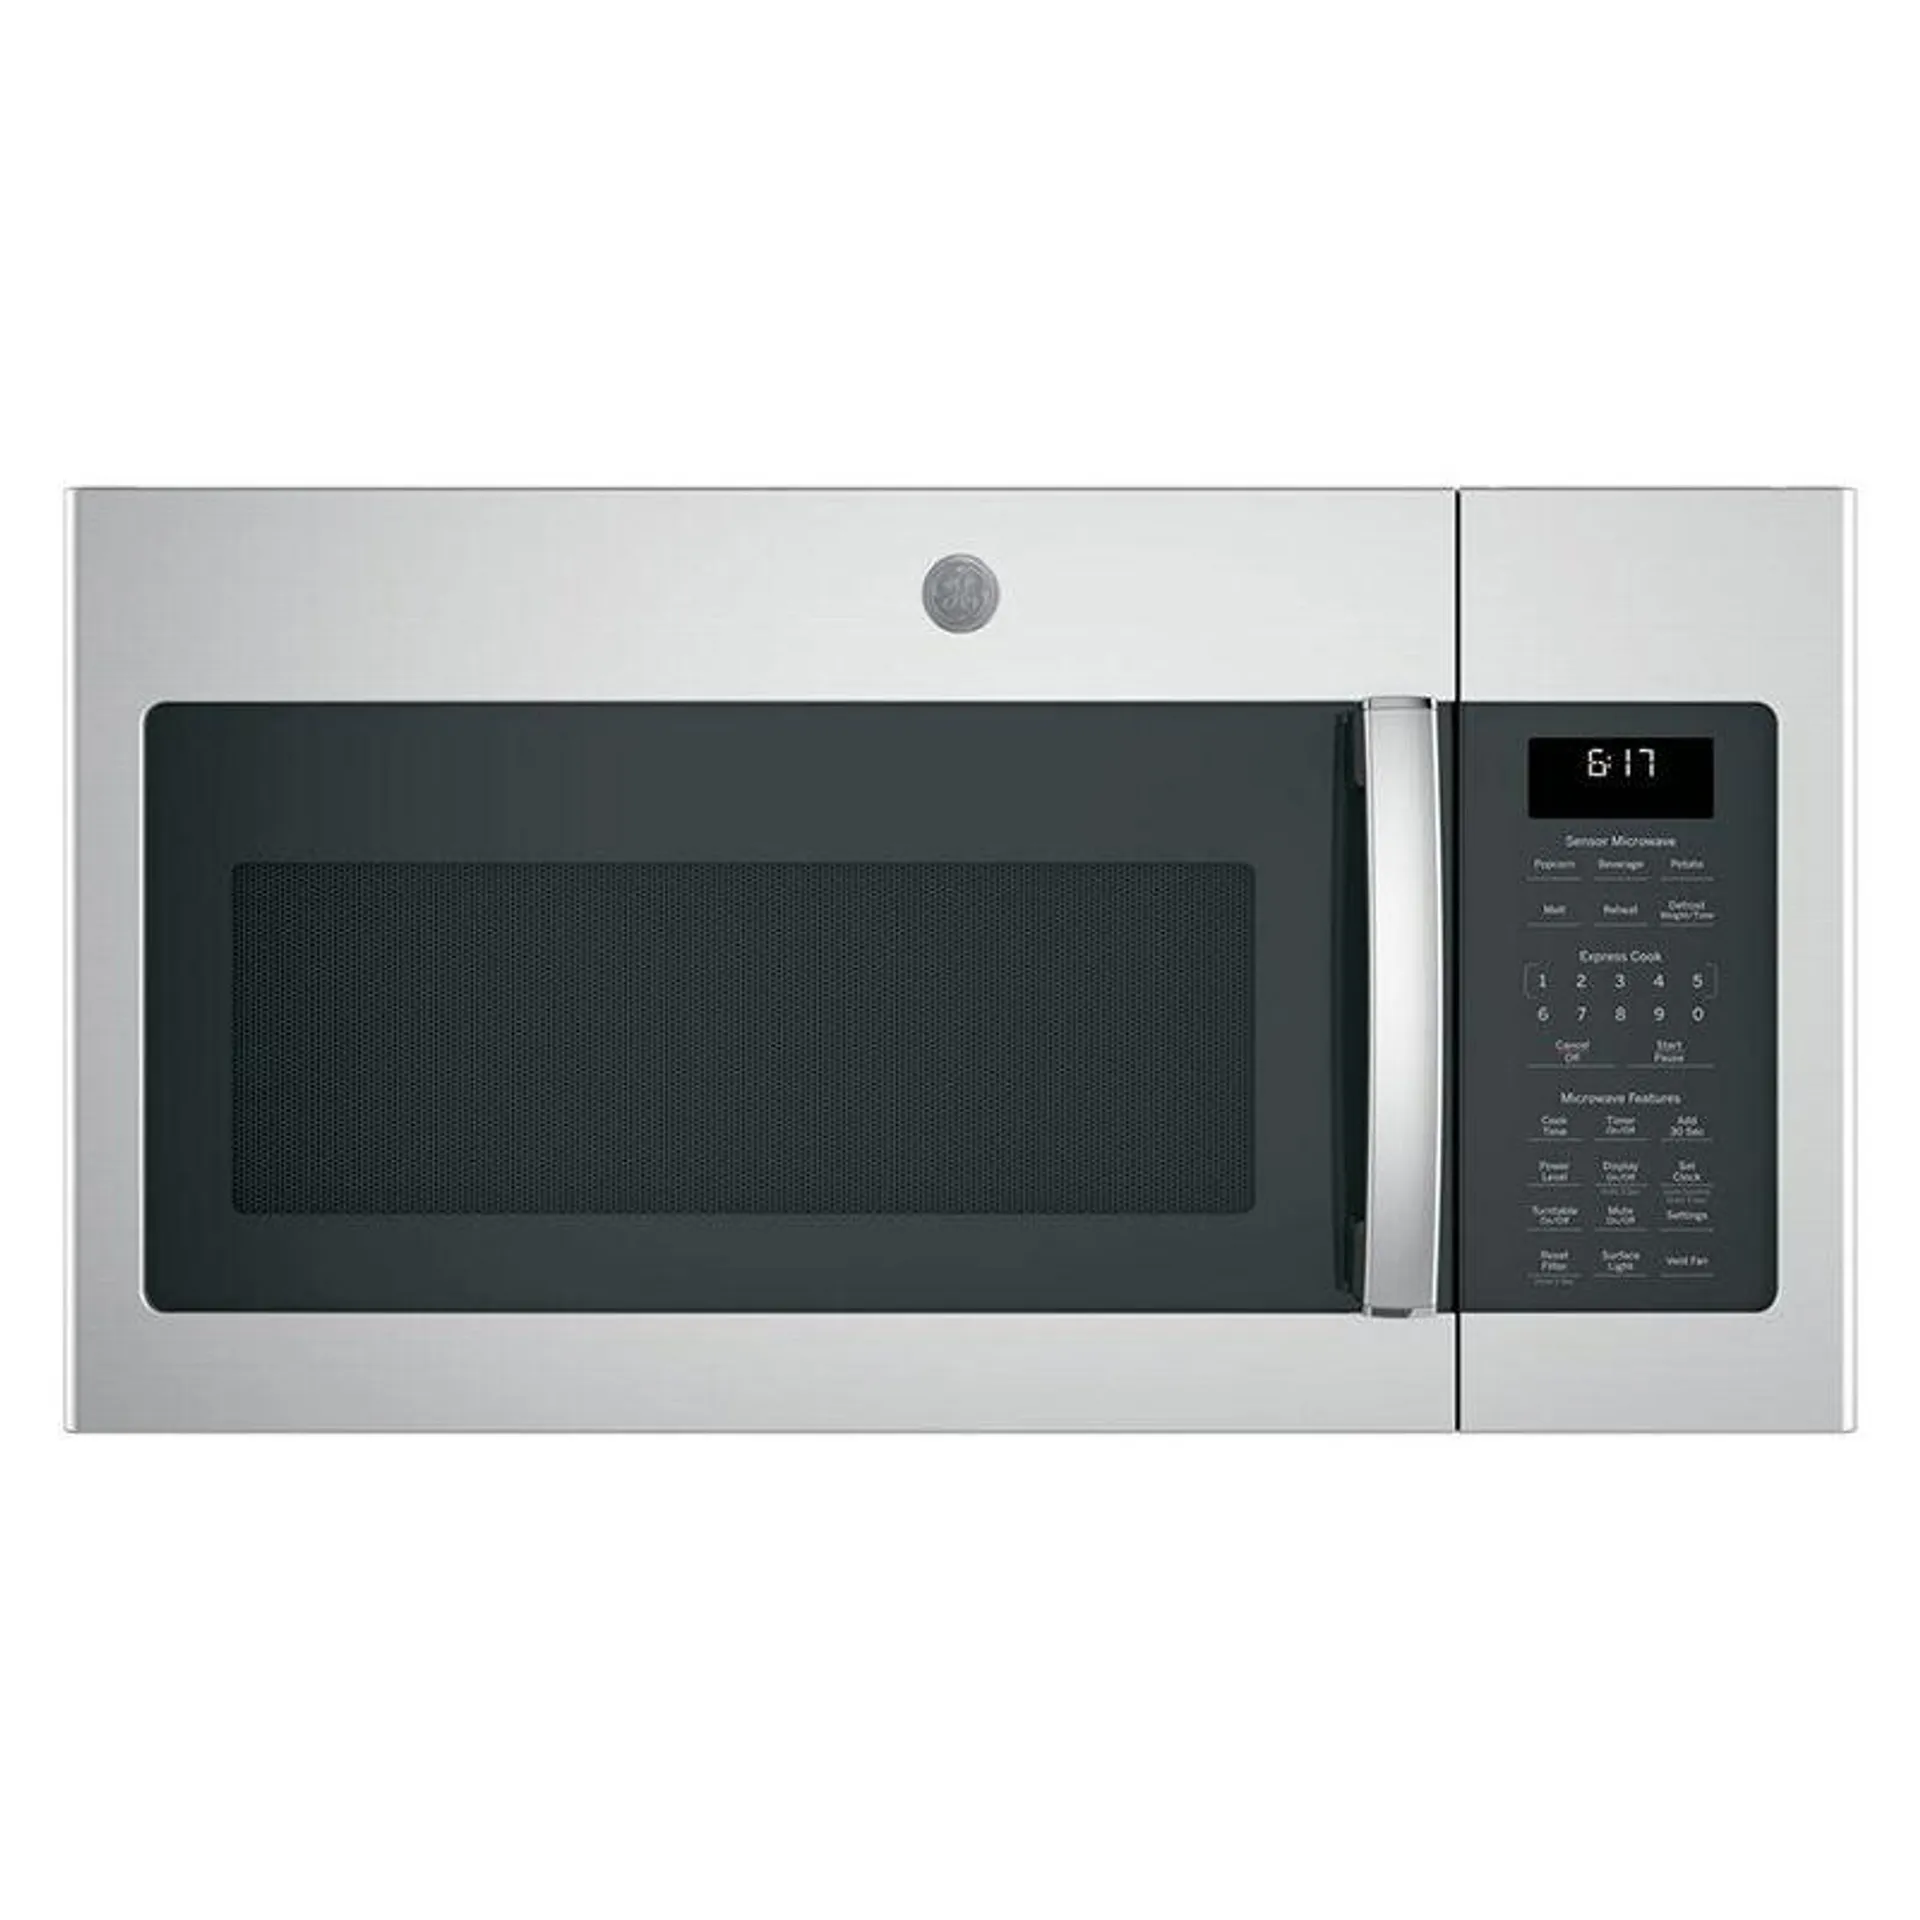 GE 30" 1.7 Cu. Ft. Over-the-Range Microwave with 10 Power Levels, 300 CFM & Sensor Cooking Controls - Stainless Steel